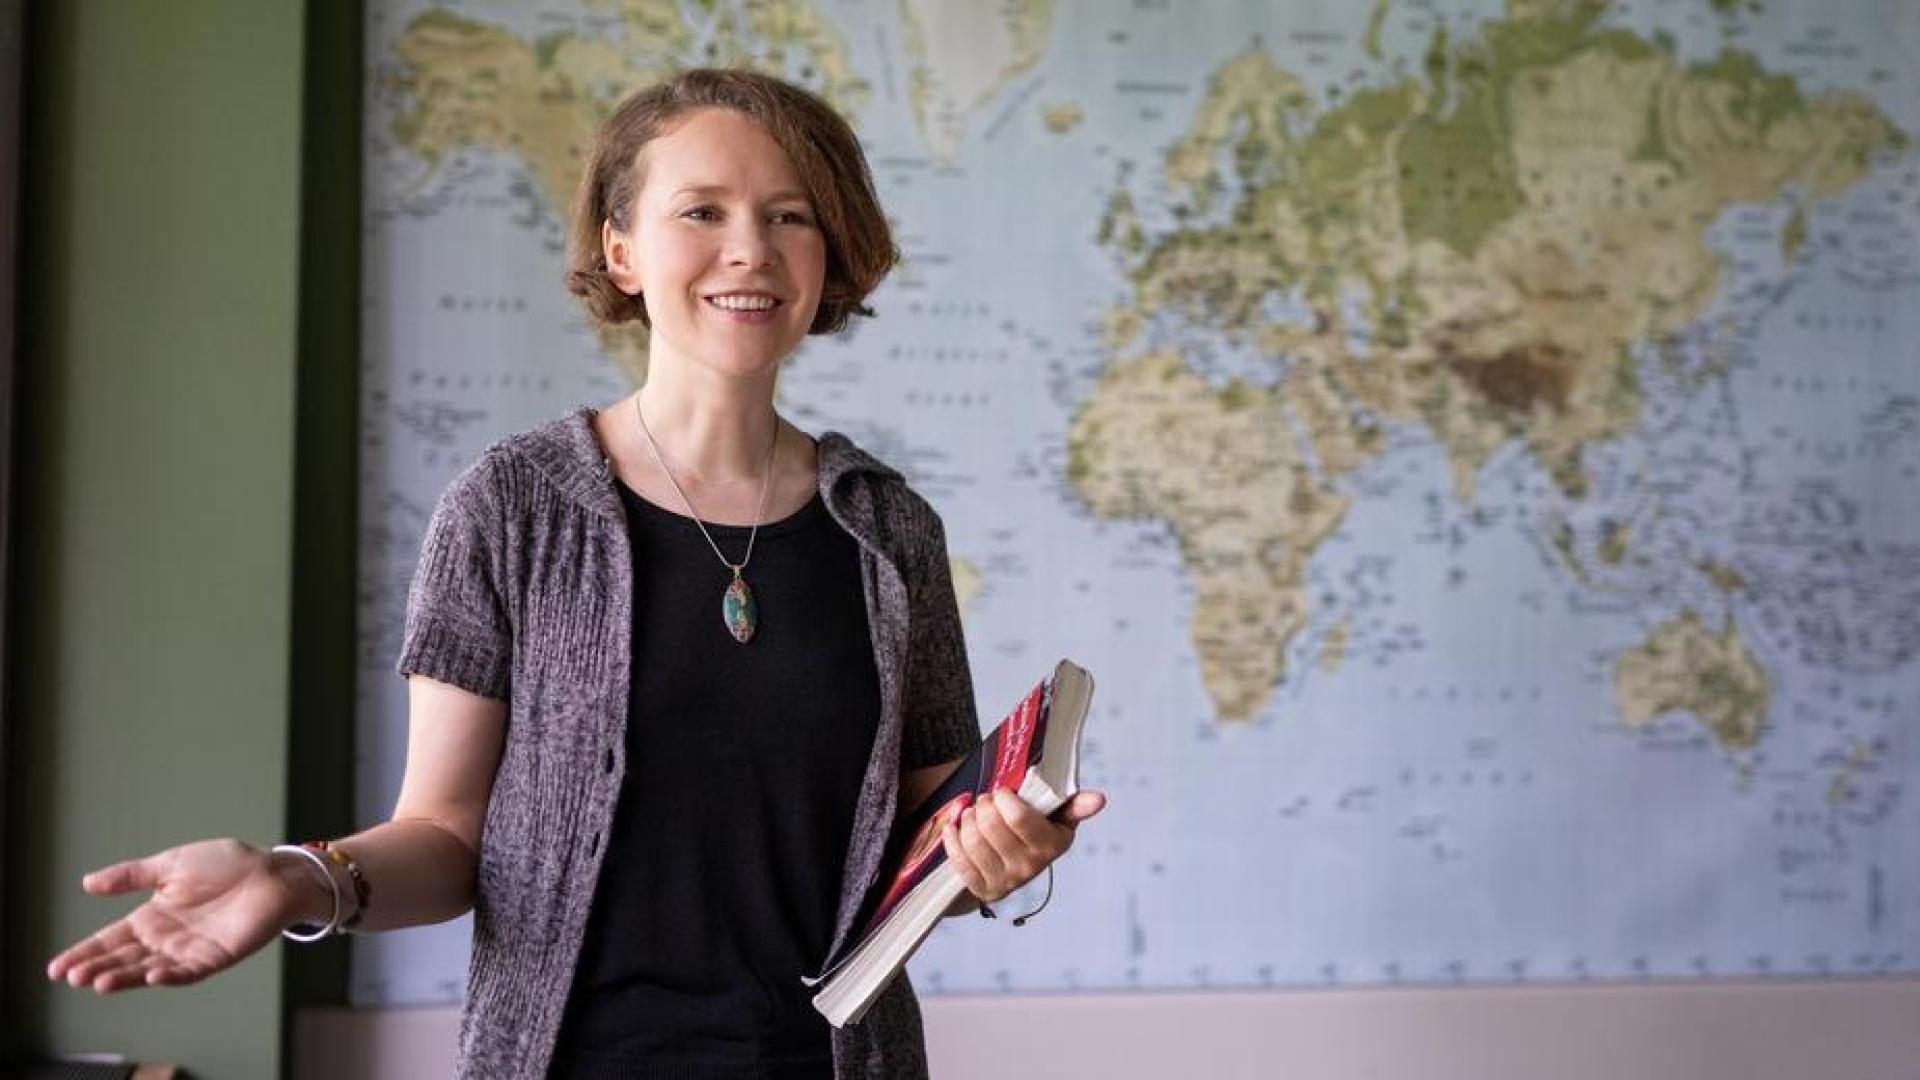 Ilse Griffin holding book and lecturing in a room with a world map behind her 